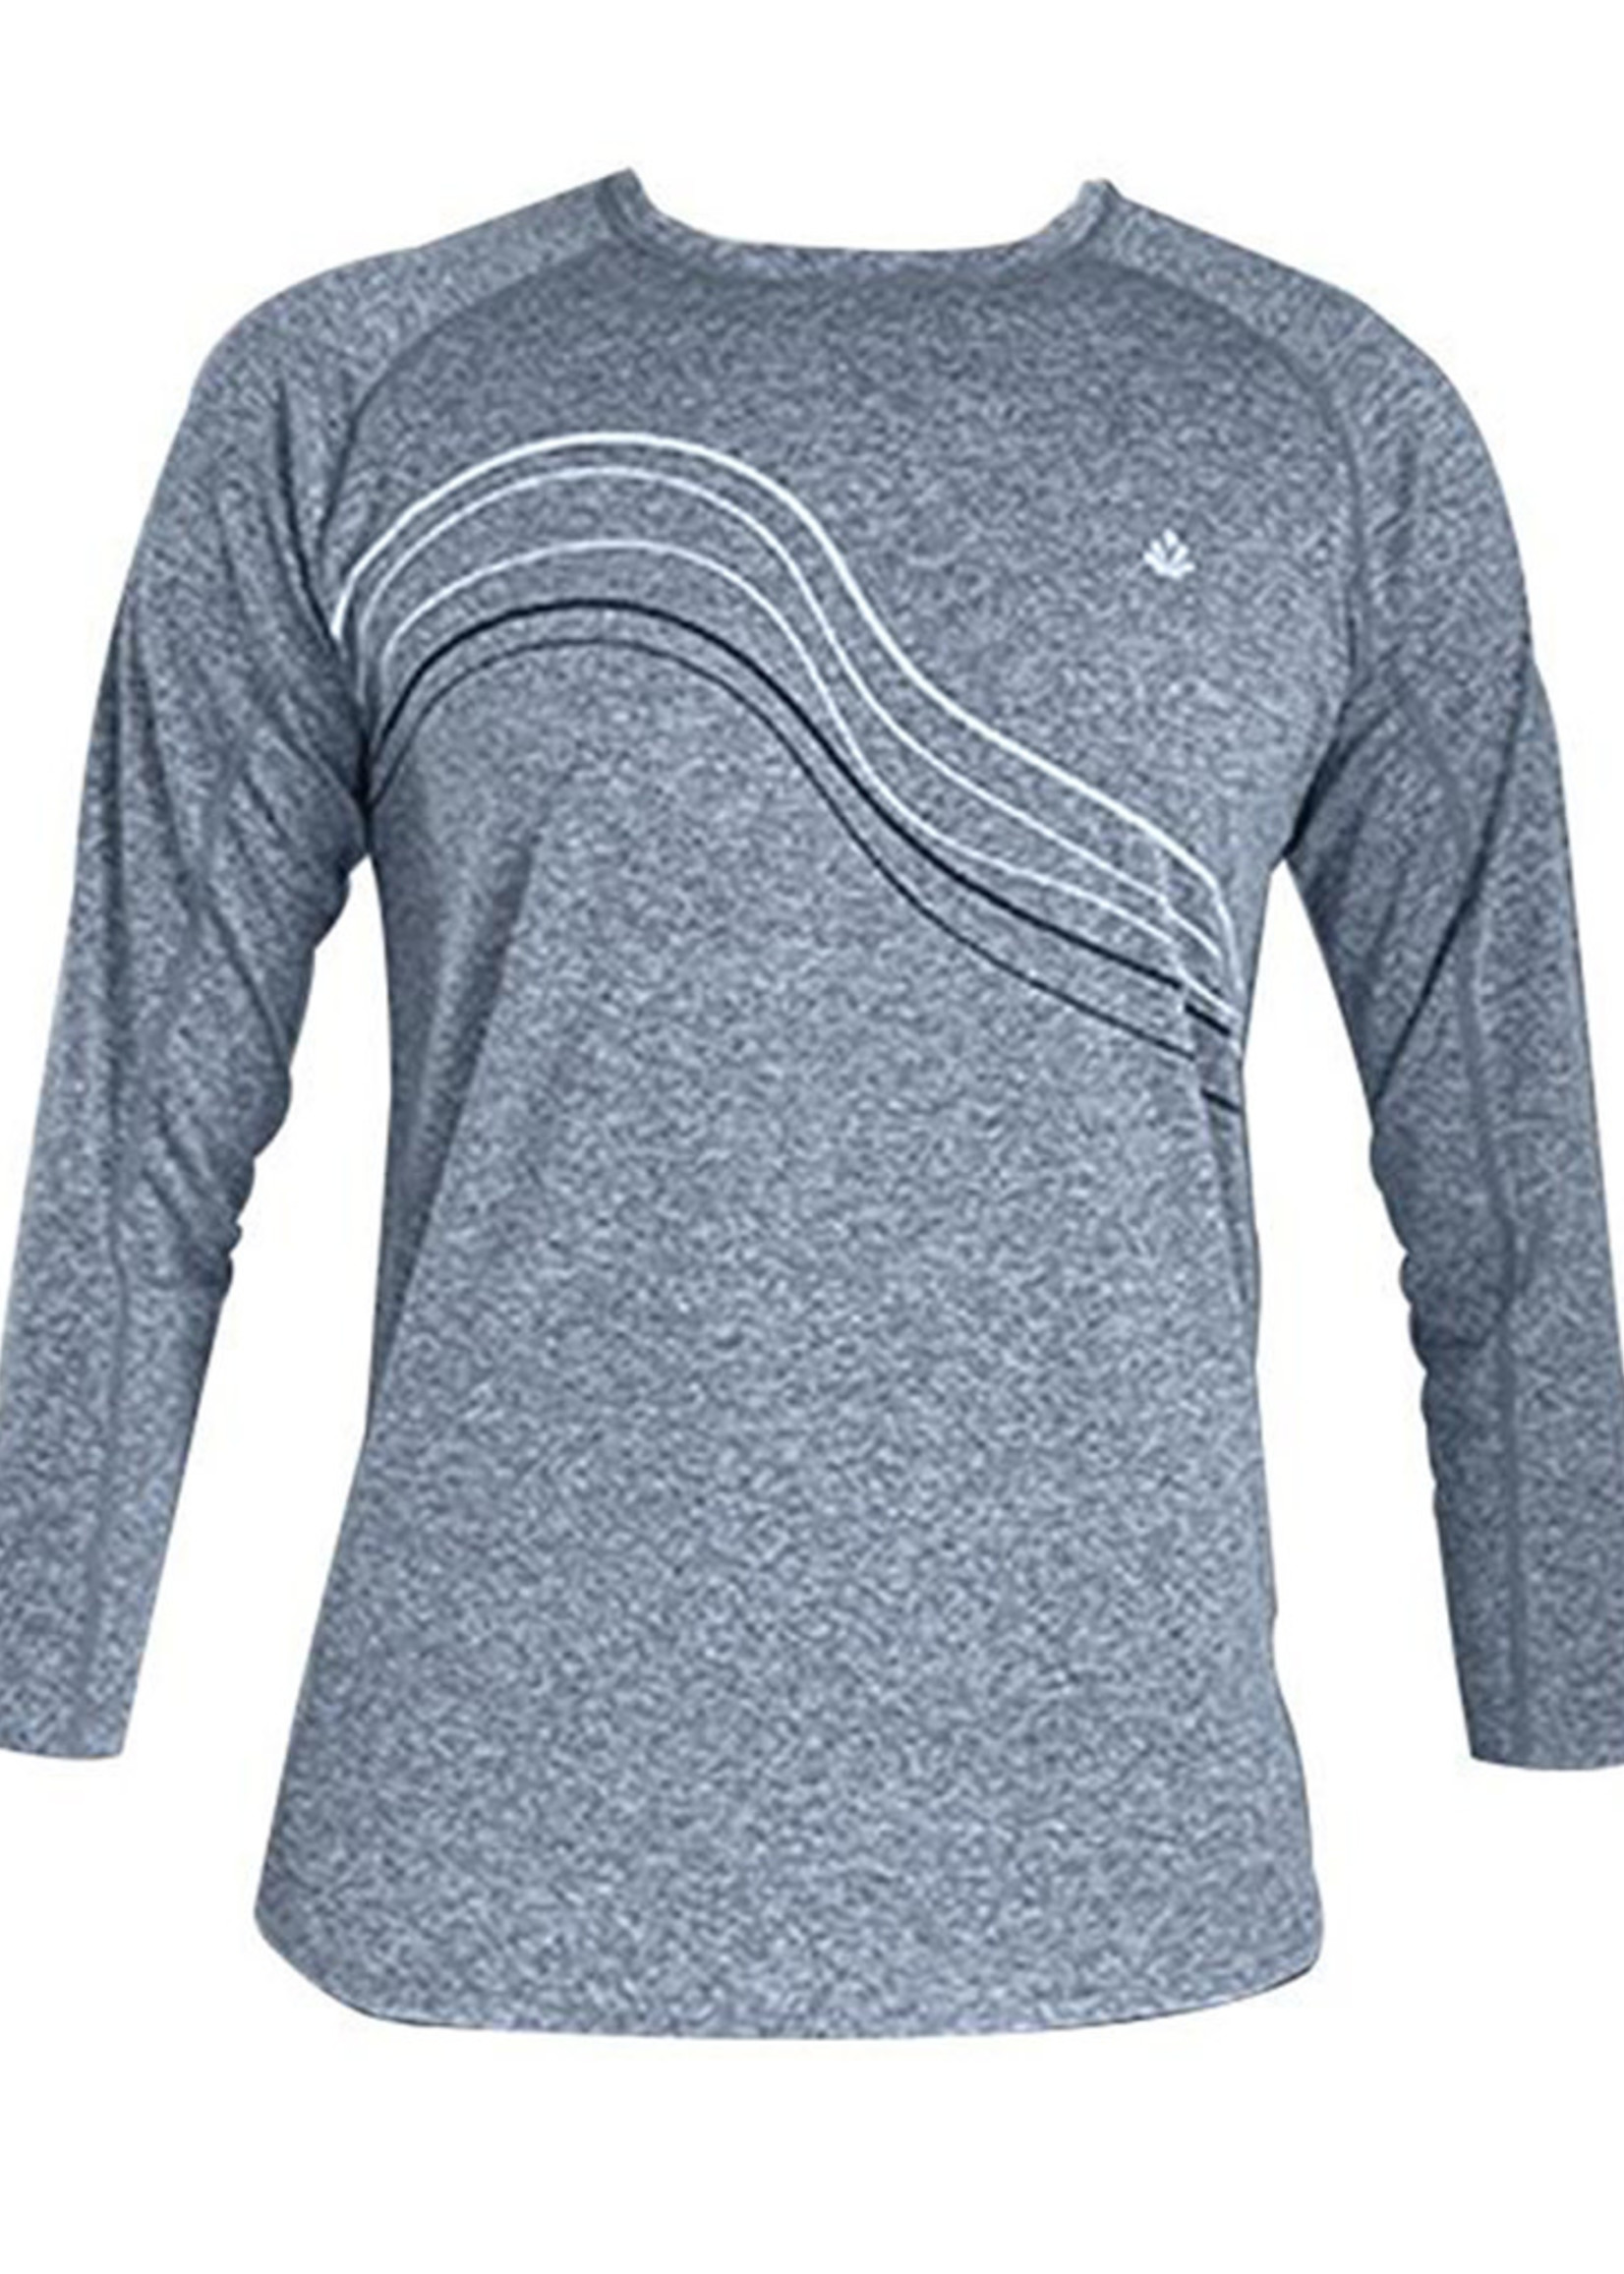 Saint Jacques Lycra Long Sleeve Loose Fit Water T-Shirt Waves UV Protection - Men